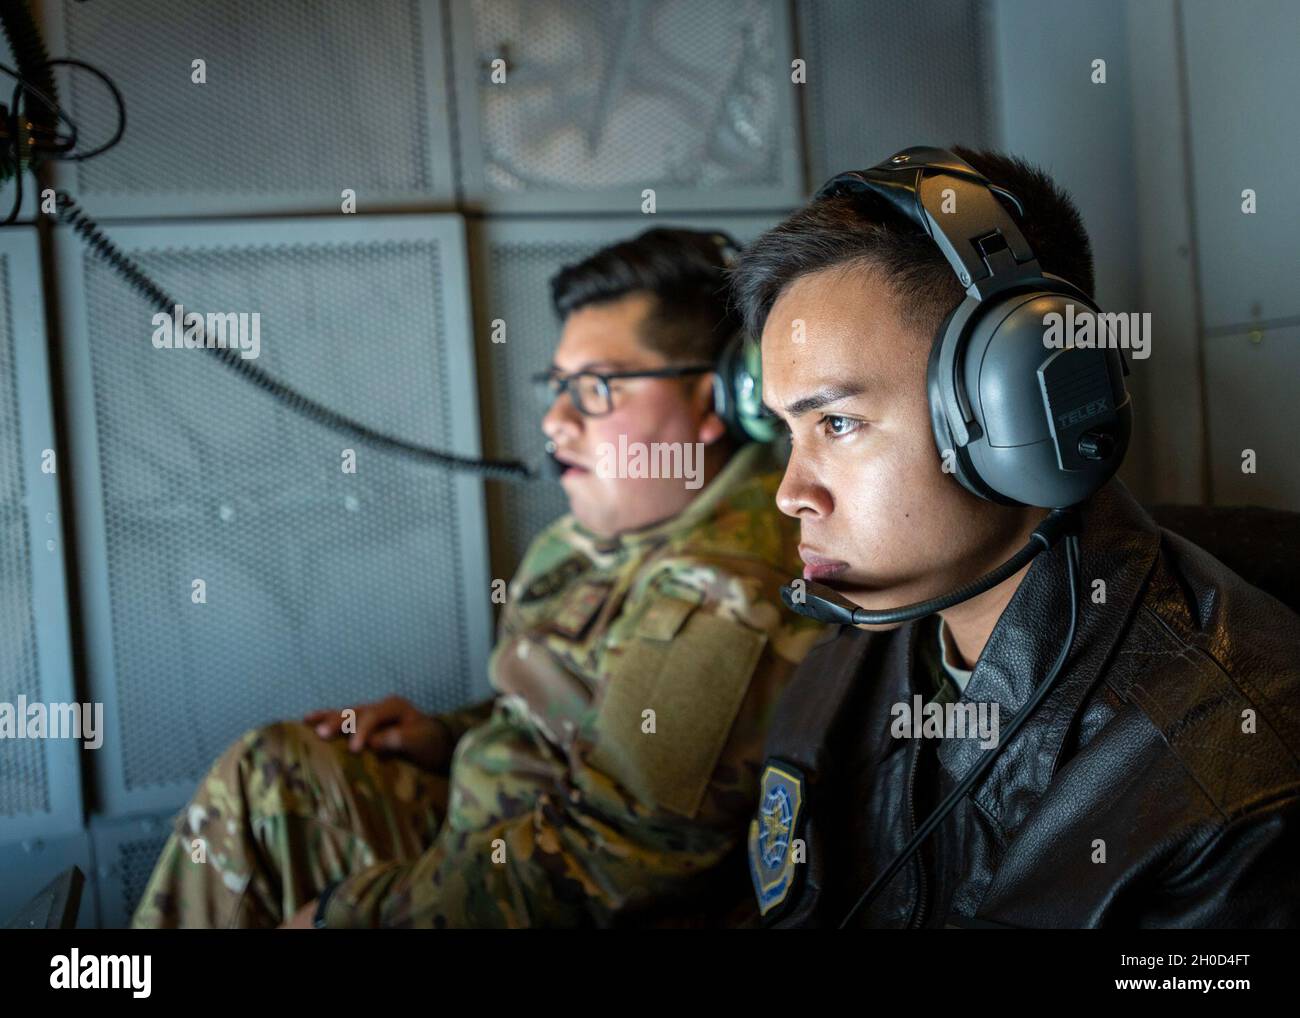 U.S. Air Force Senior Airman Philip Nadela, right, 9th Air Refueling Squadron KC-10 Extender boom operator, refuels an F-16C Fighting Falcon Jan. 28, 2021, over California as Staff Sgt. Alexis Martinez, 9th ARS boom operator, provides support. The F-16s are assigned to the 177th Fighter Wing in Egg Harbor Township, New Jersey. Stock Photo